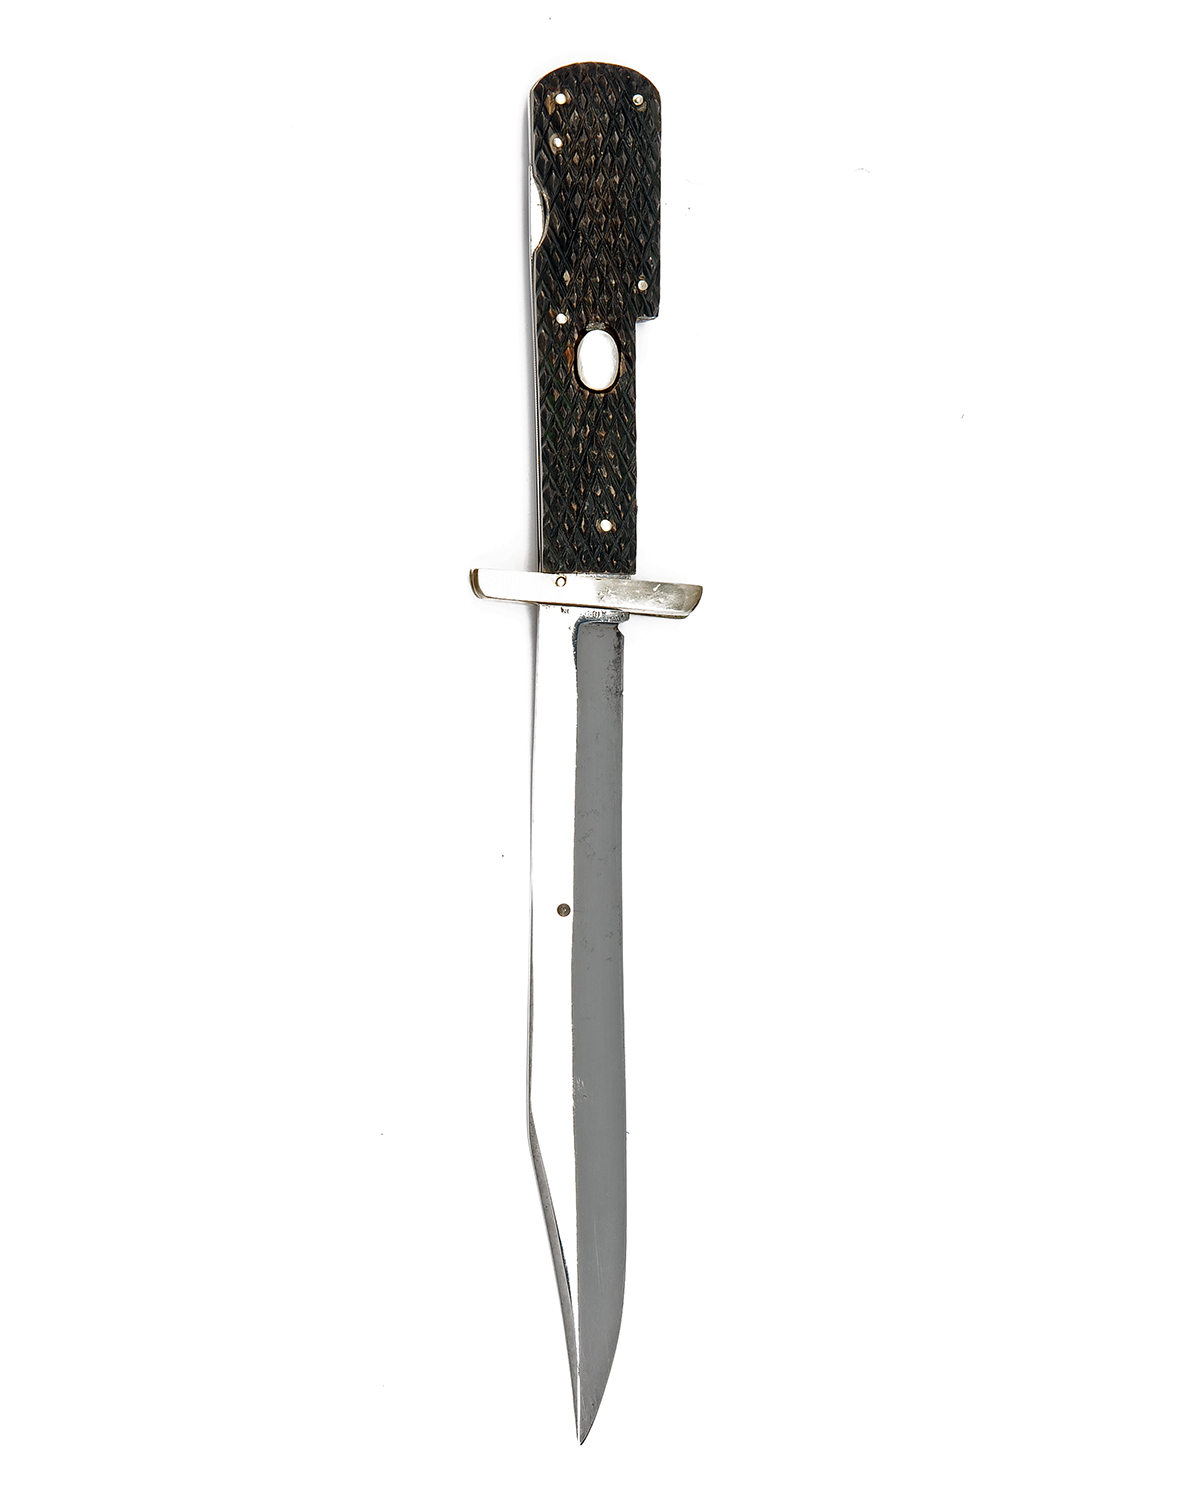 G. IBBERSON FOR COGSWELL & HARRISON, LONDON A SCARCE FOLDING BOWIE-KNIFE, circa 1925, with narrow